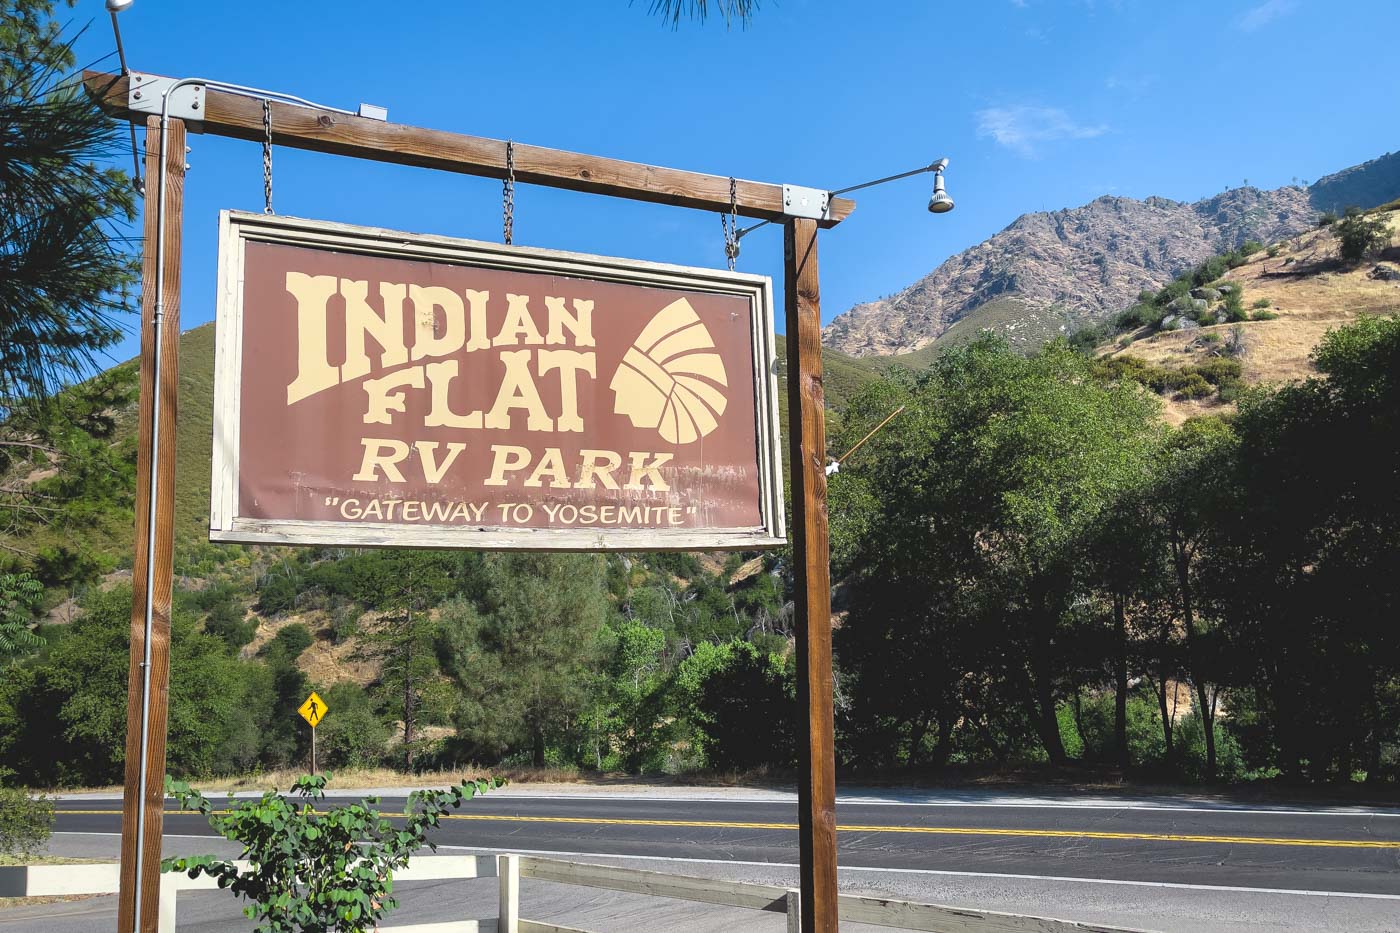 Entrance sign to Indian Flat RV Park in the Yosemite mountains on a sunny day.